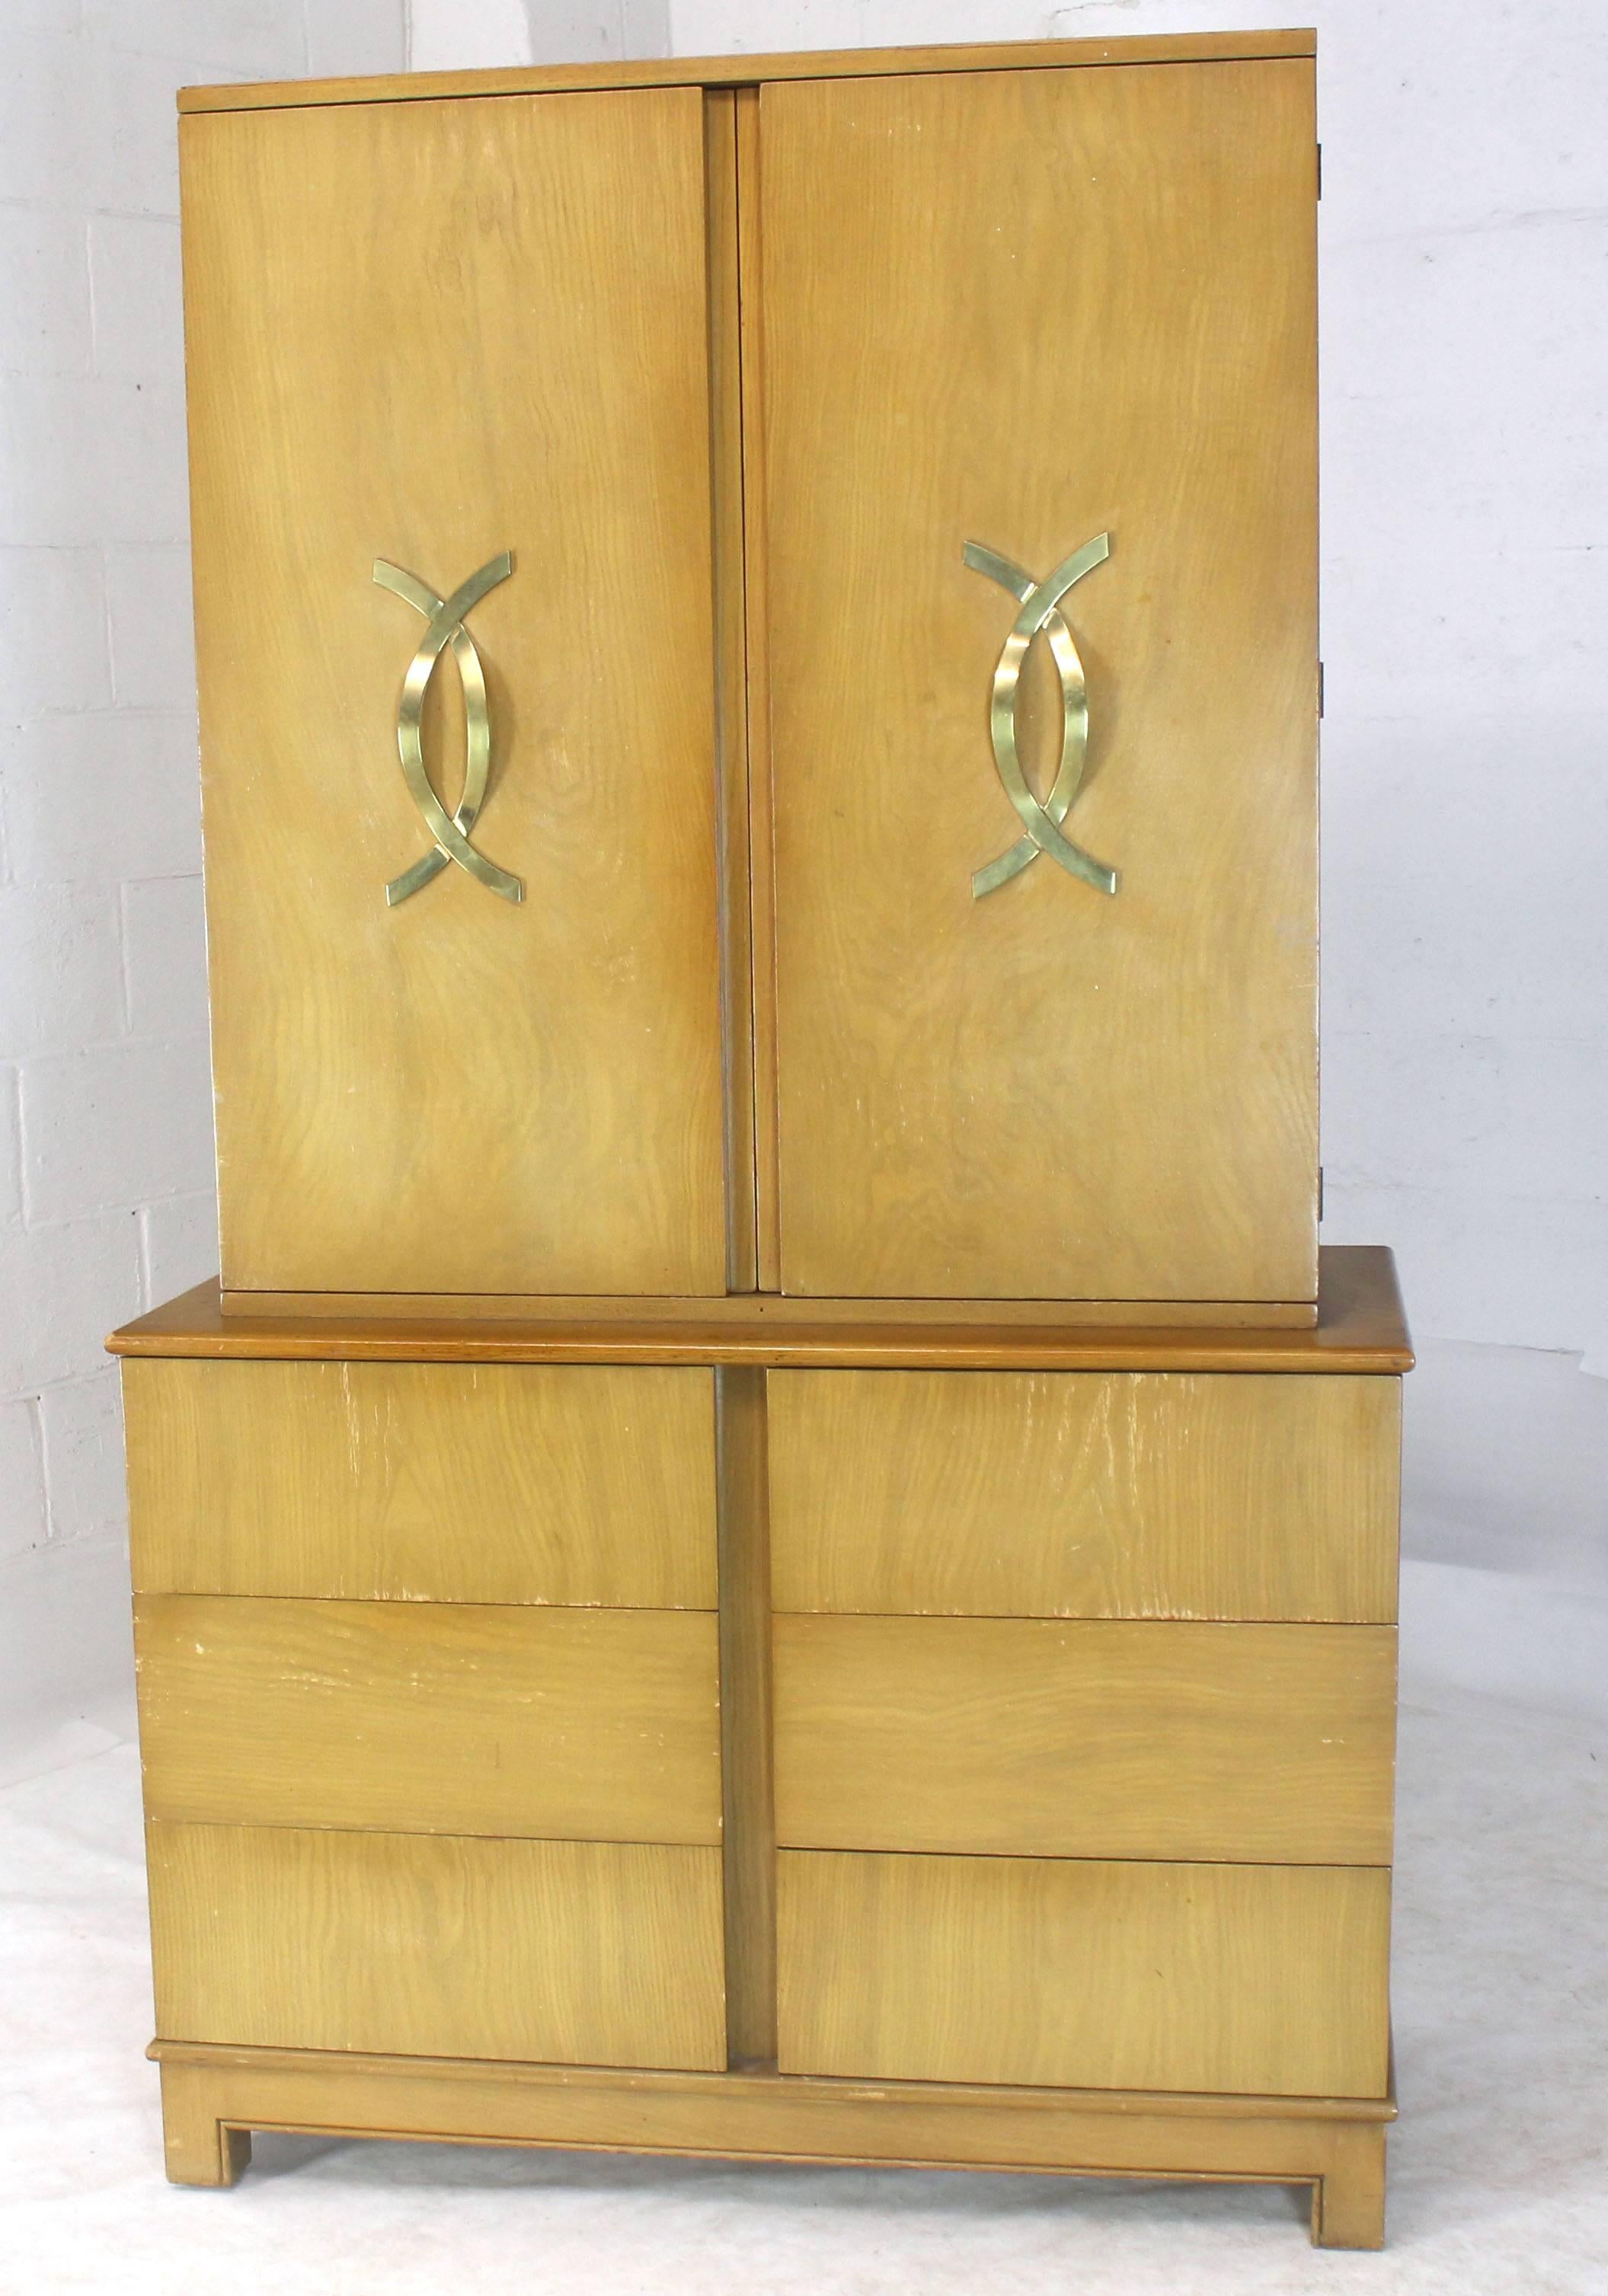 Mid century modern tall high chest with mirrored compartment and brass figural pulls. There are multiple storage drawers triptych mirror perfume shelf. Outstanding craftsmanship by Grosfeld house. 